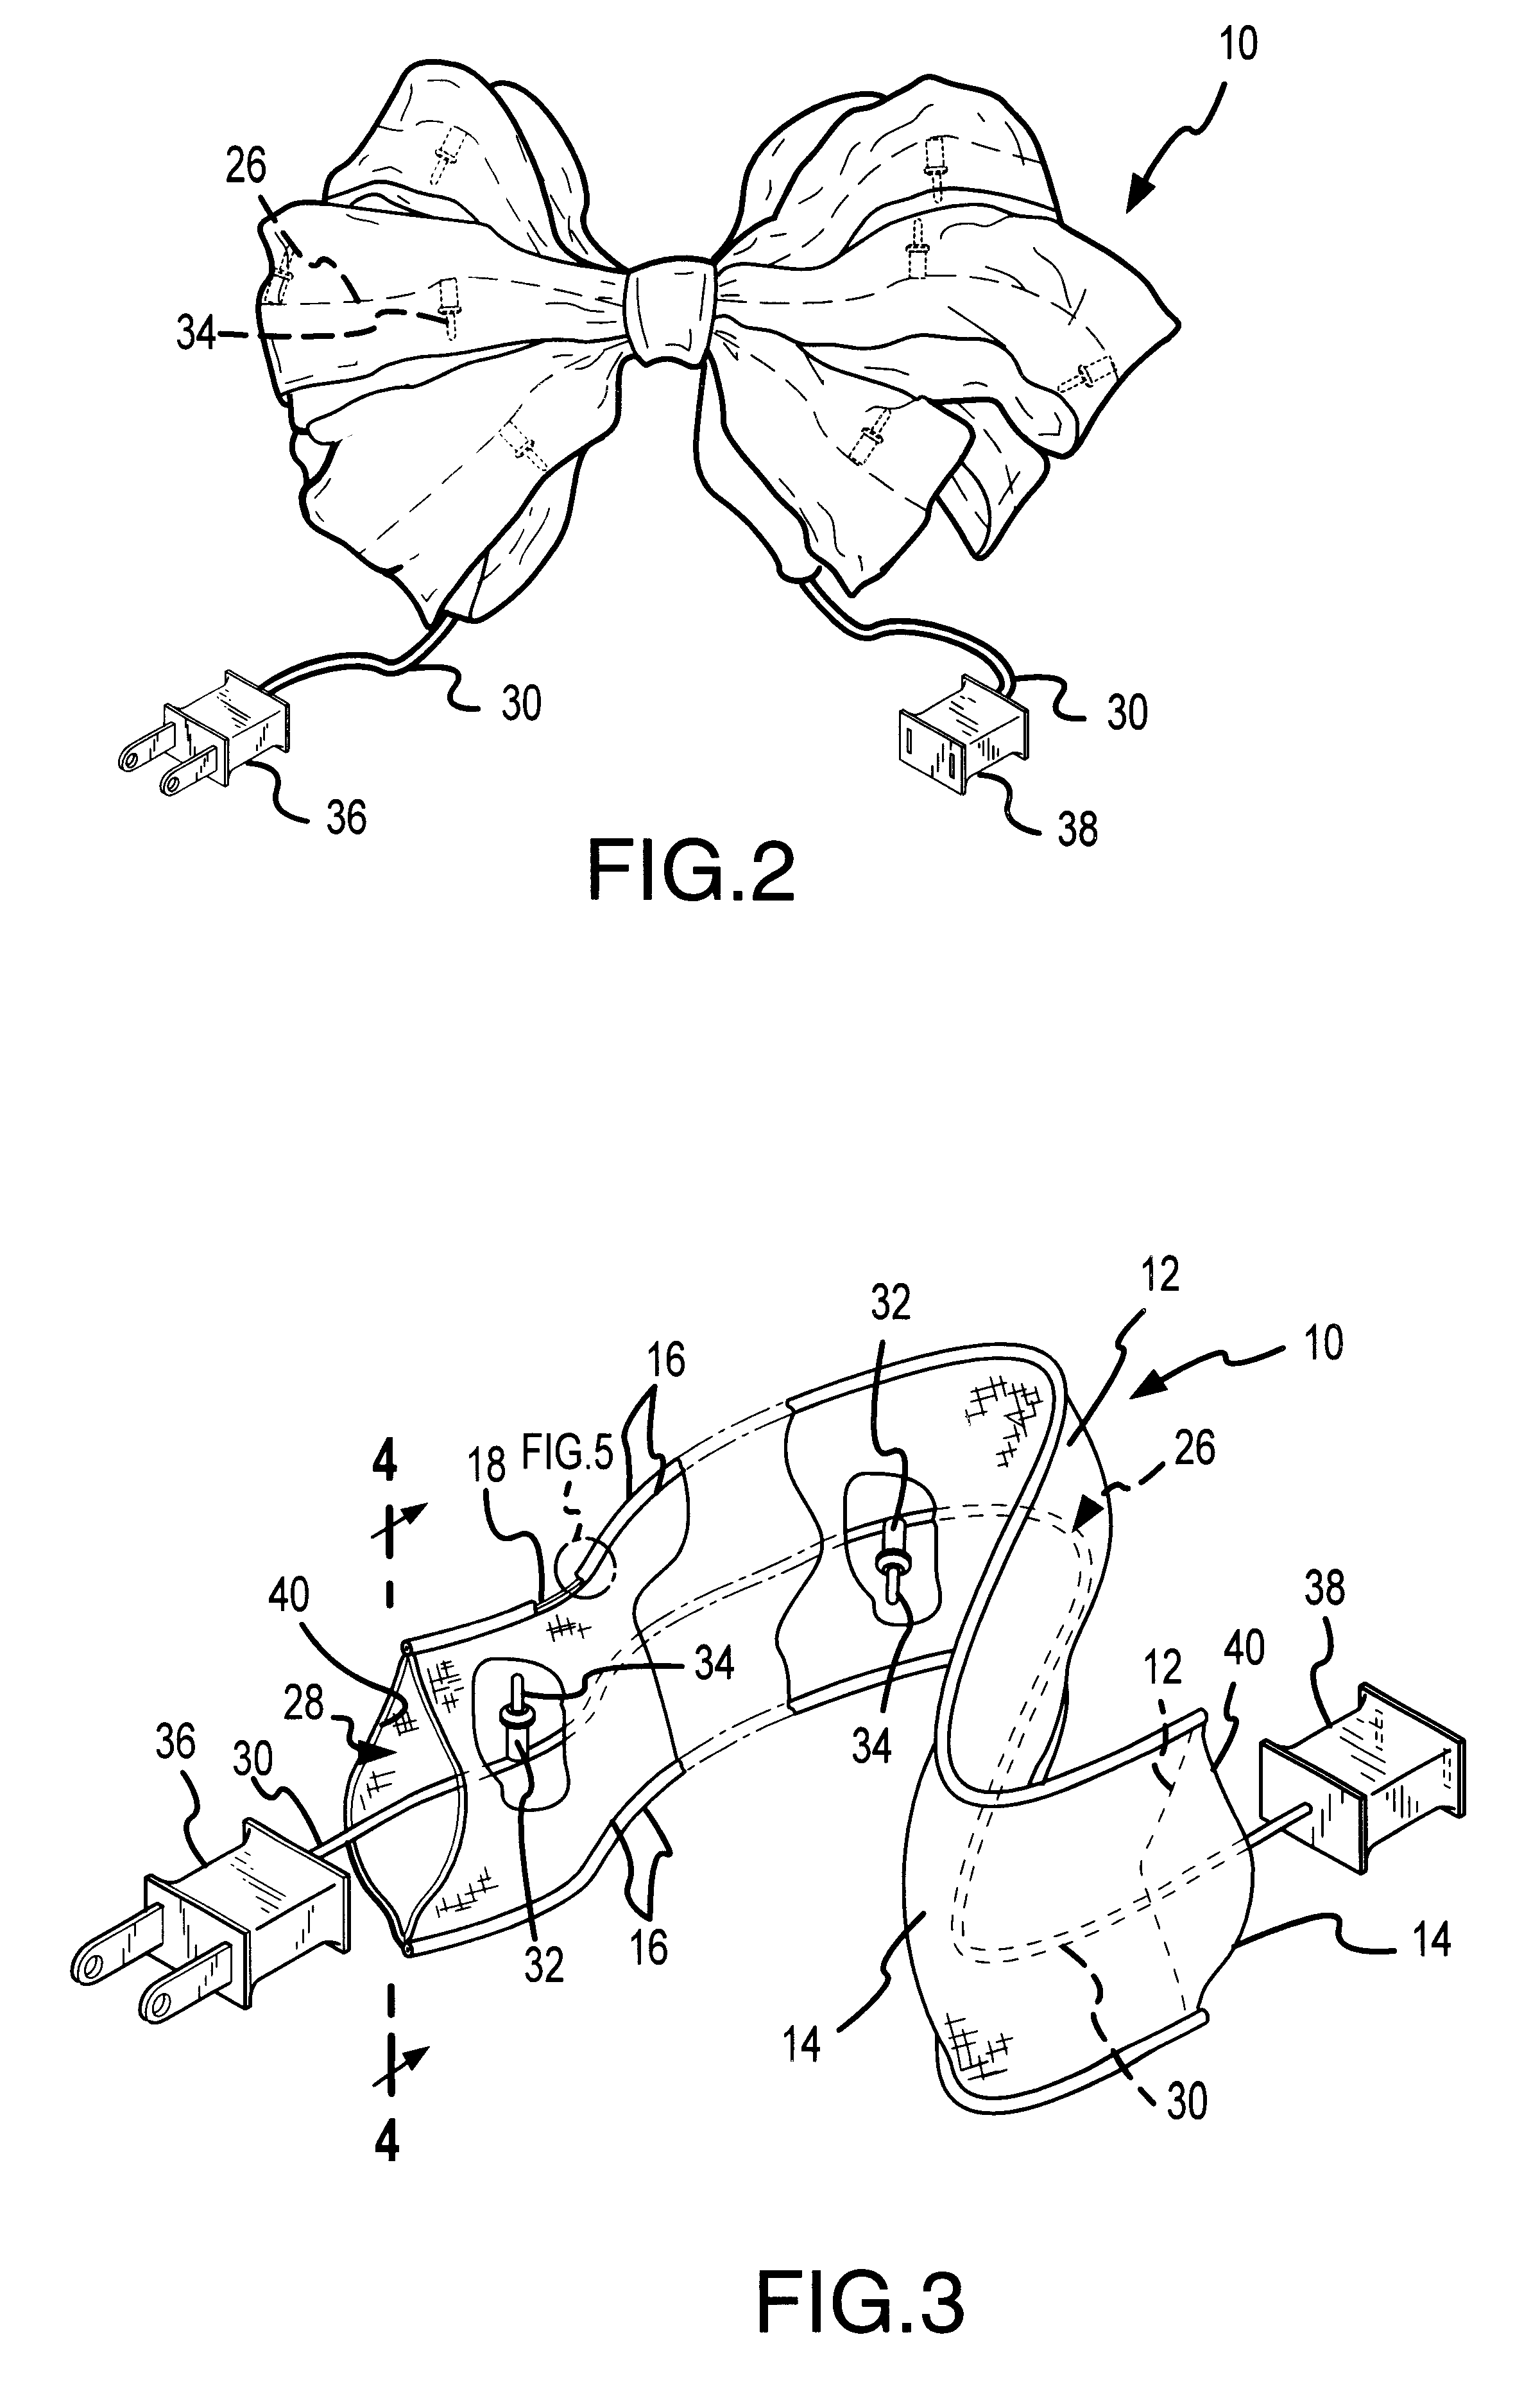 Decorative internally-lighted and position-sustaining ribbon